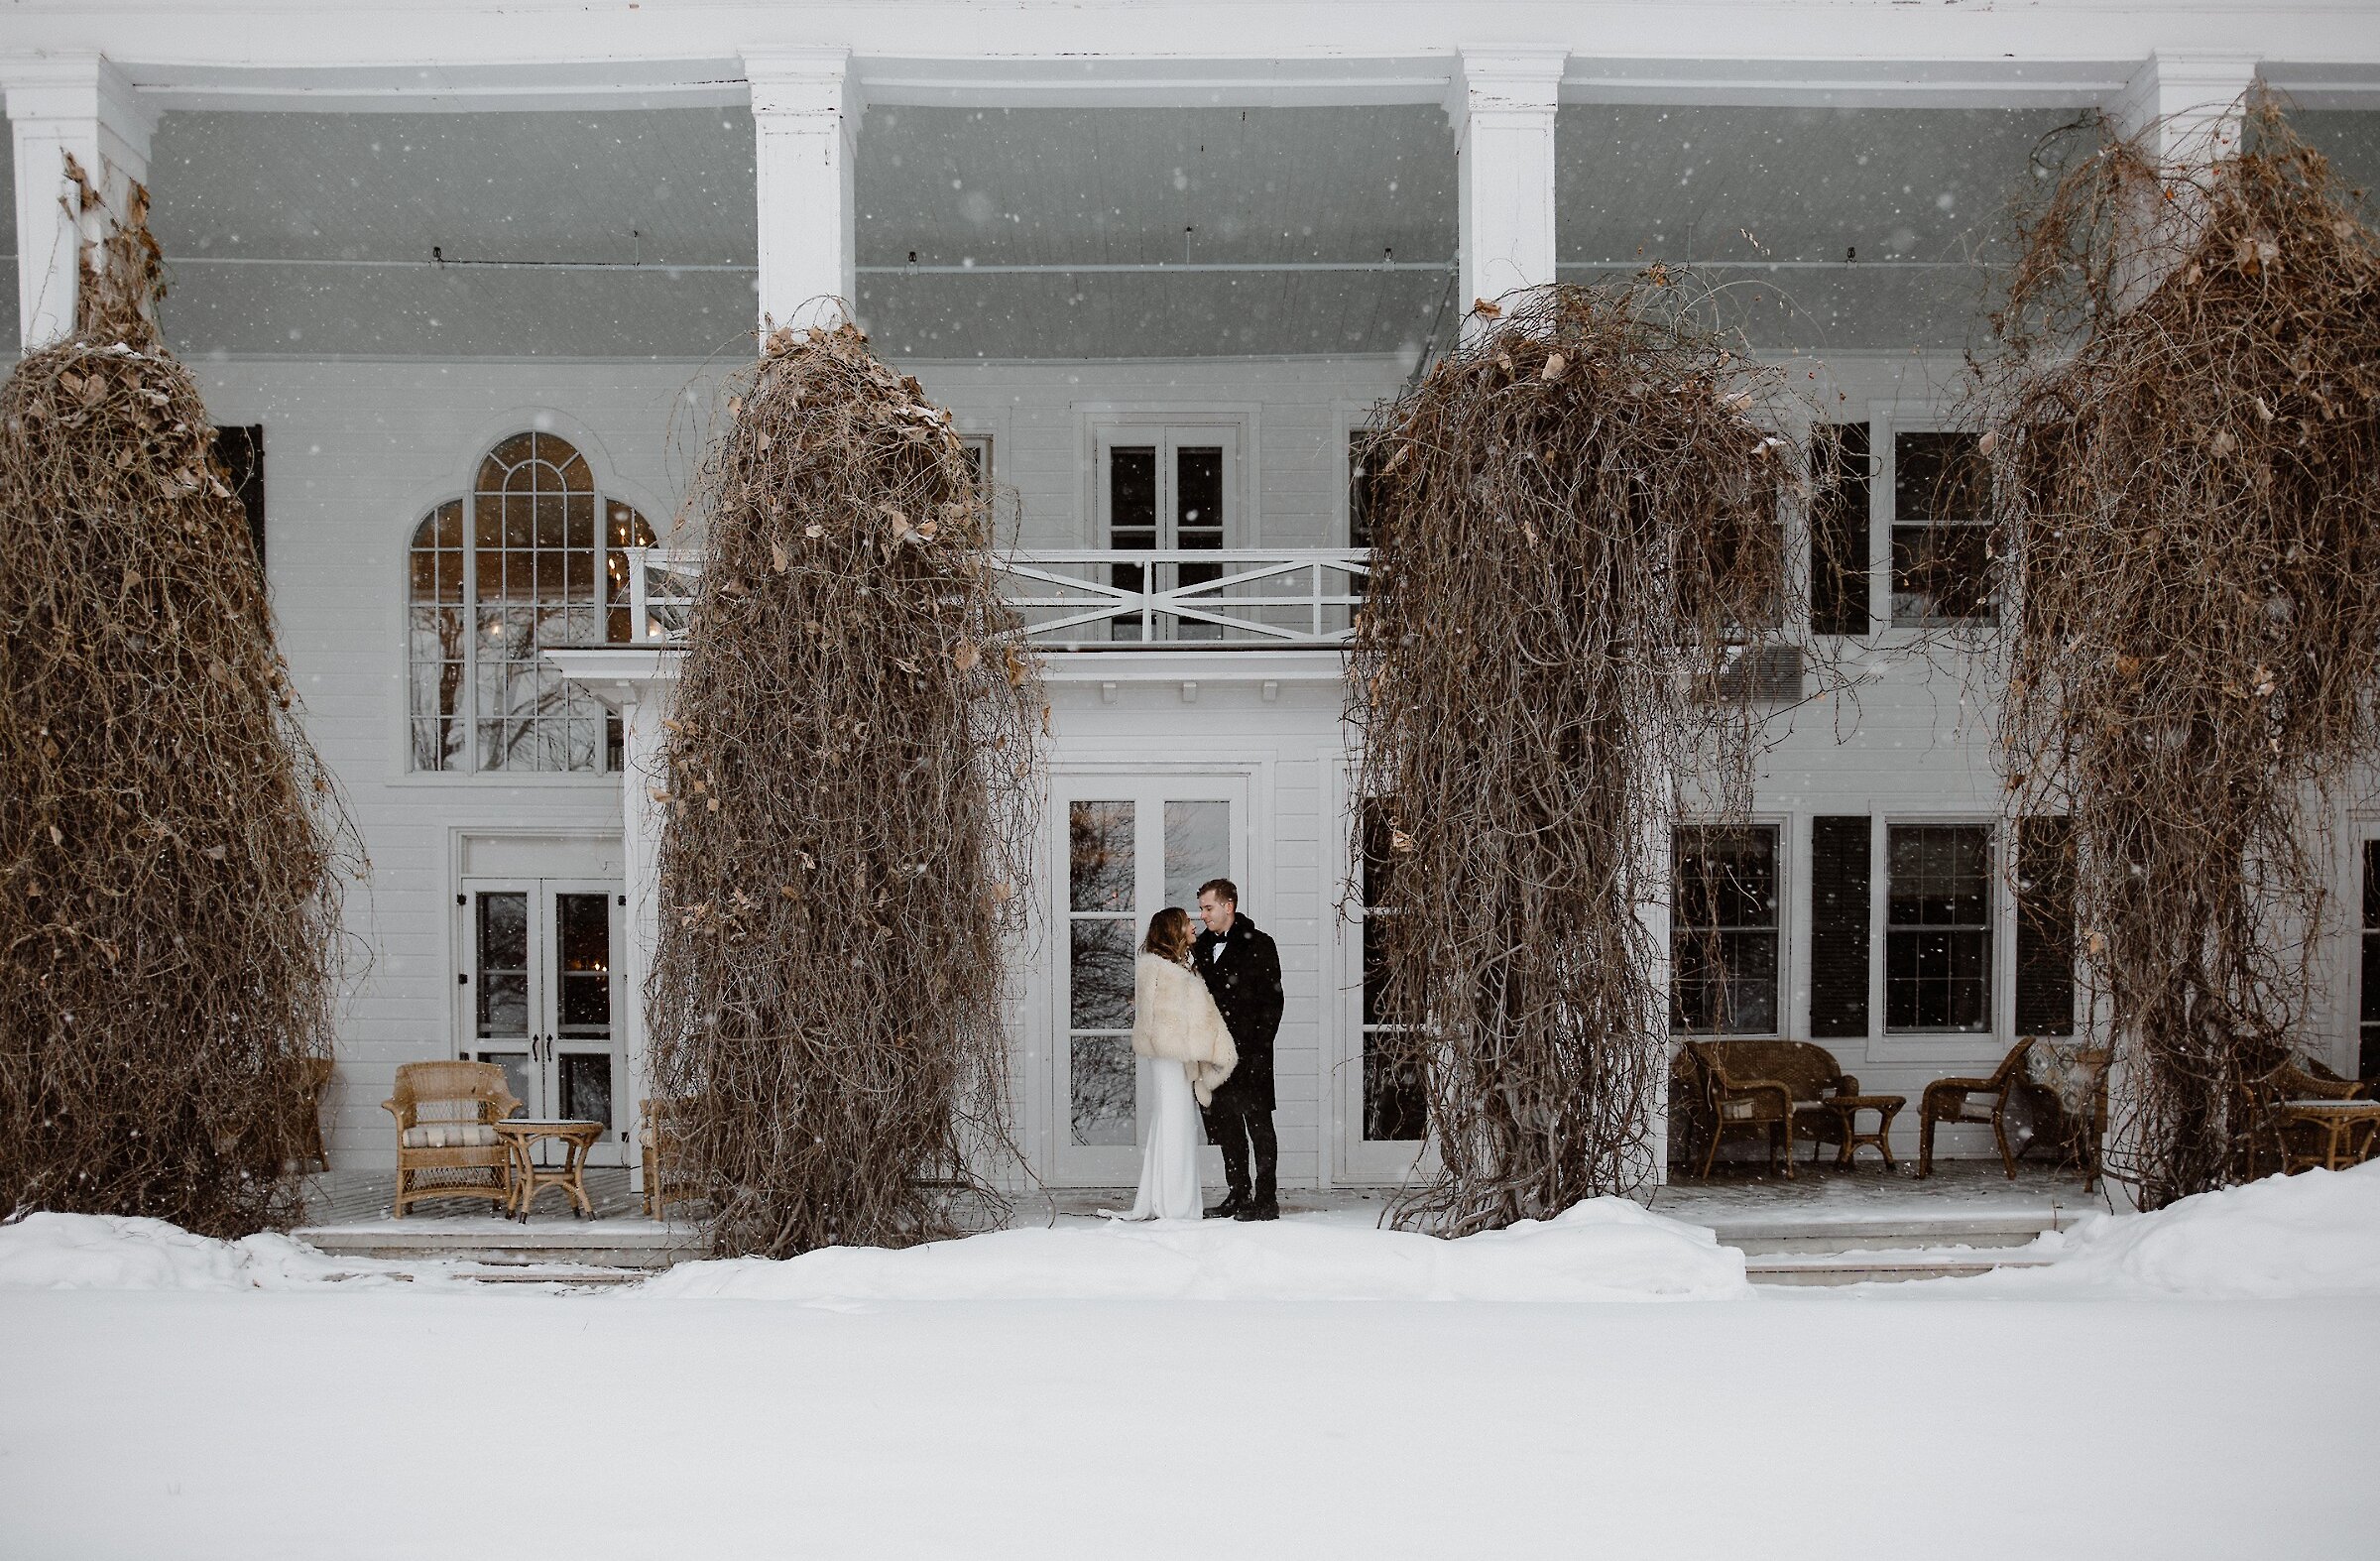 Two guests in front of the manor during winter